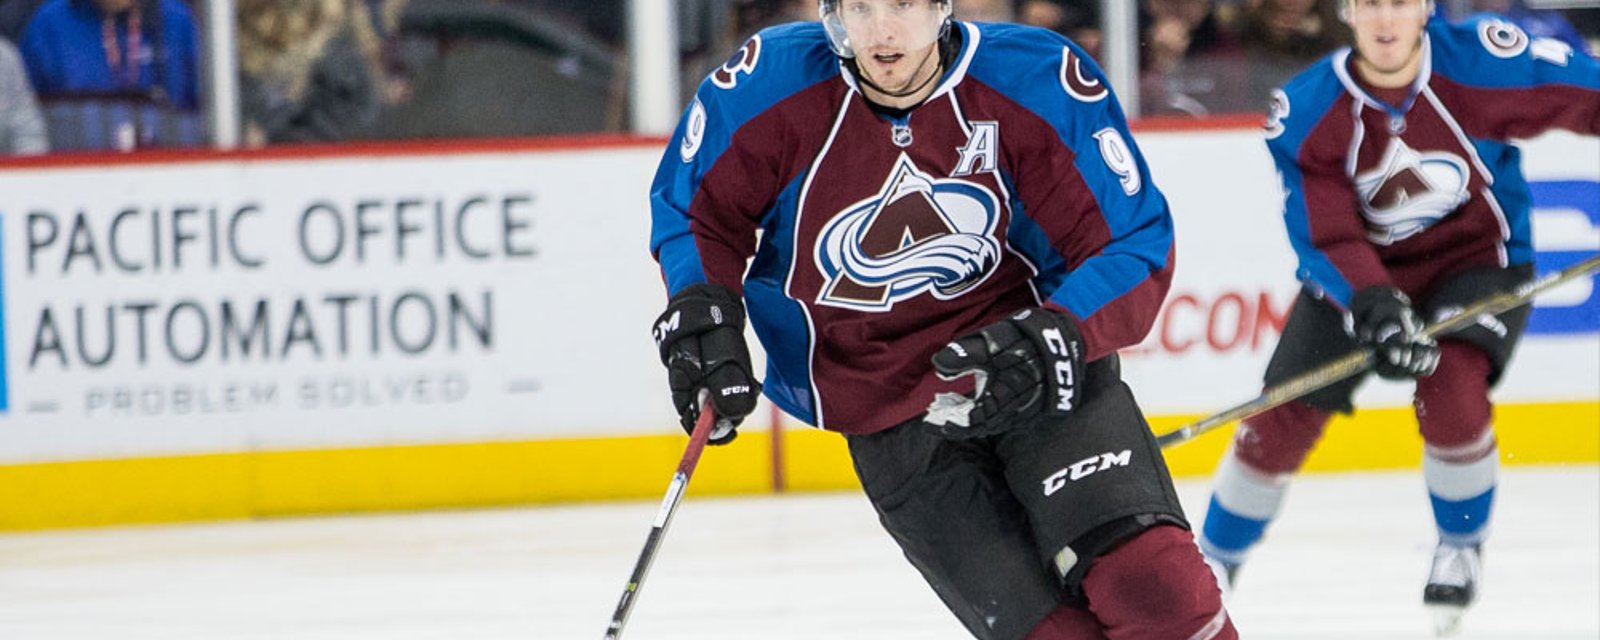 Breaking: We know exactly what the Avalanche asks for Matt Duchene